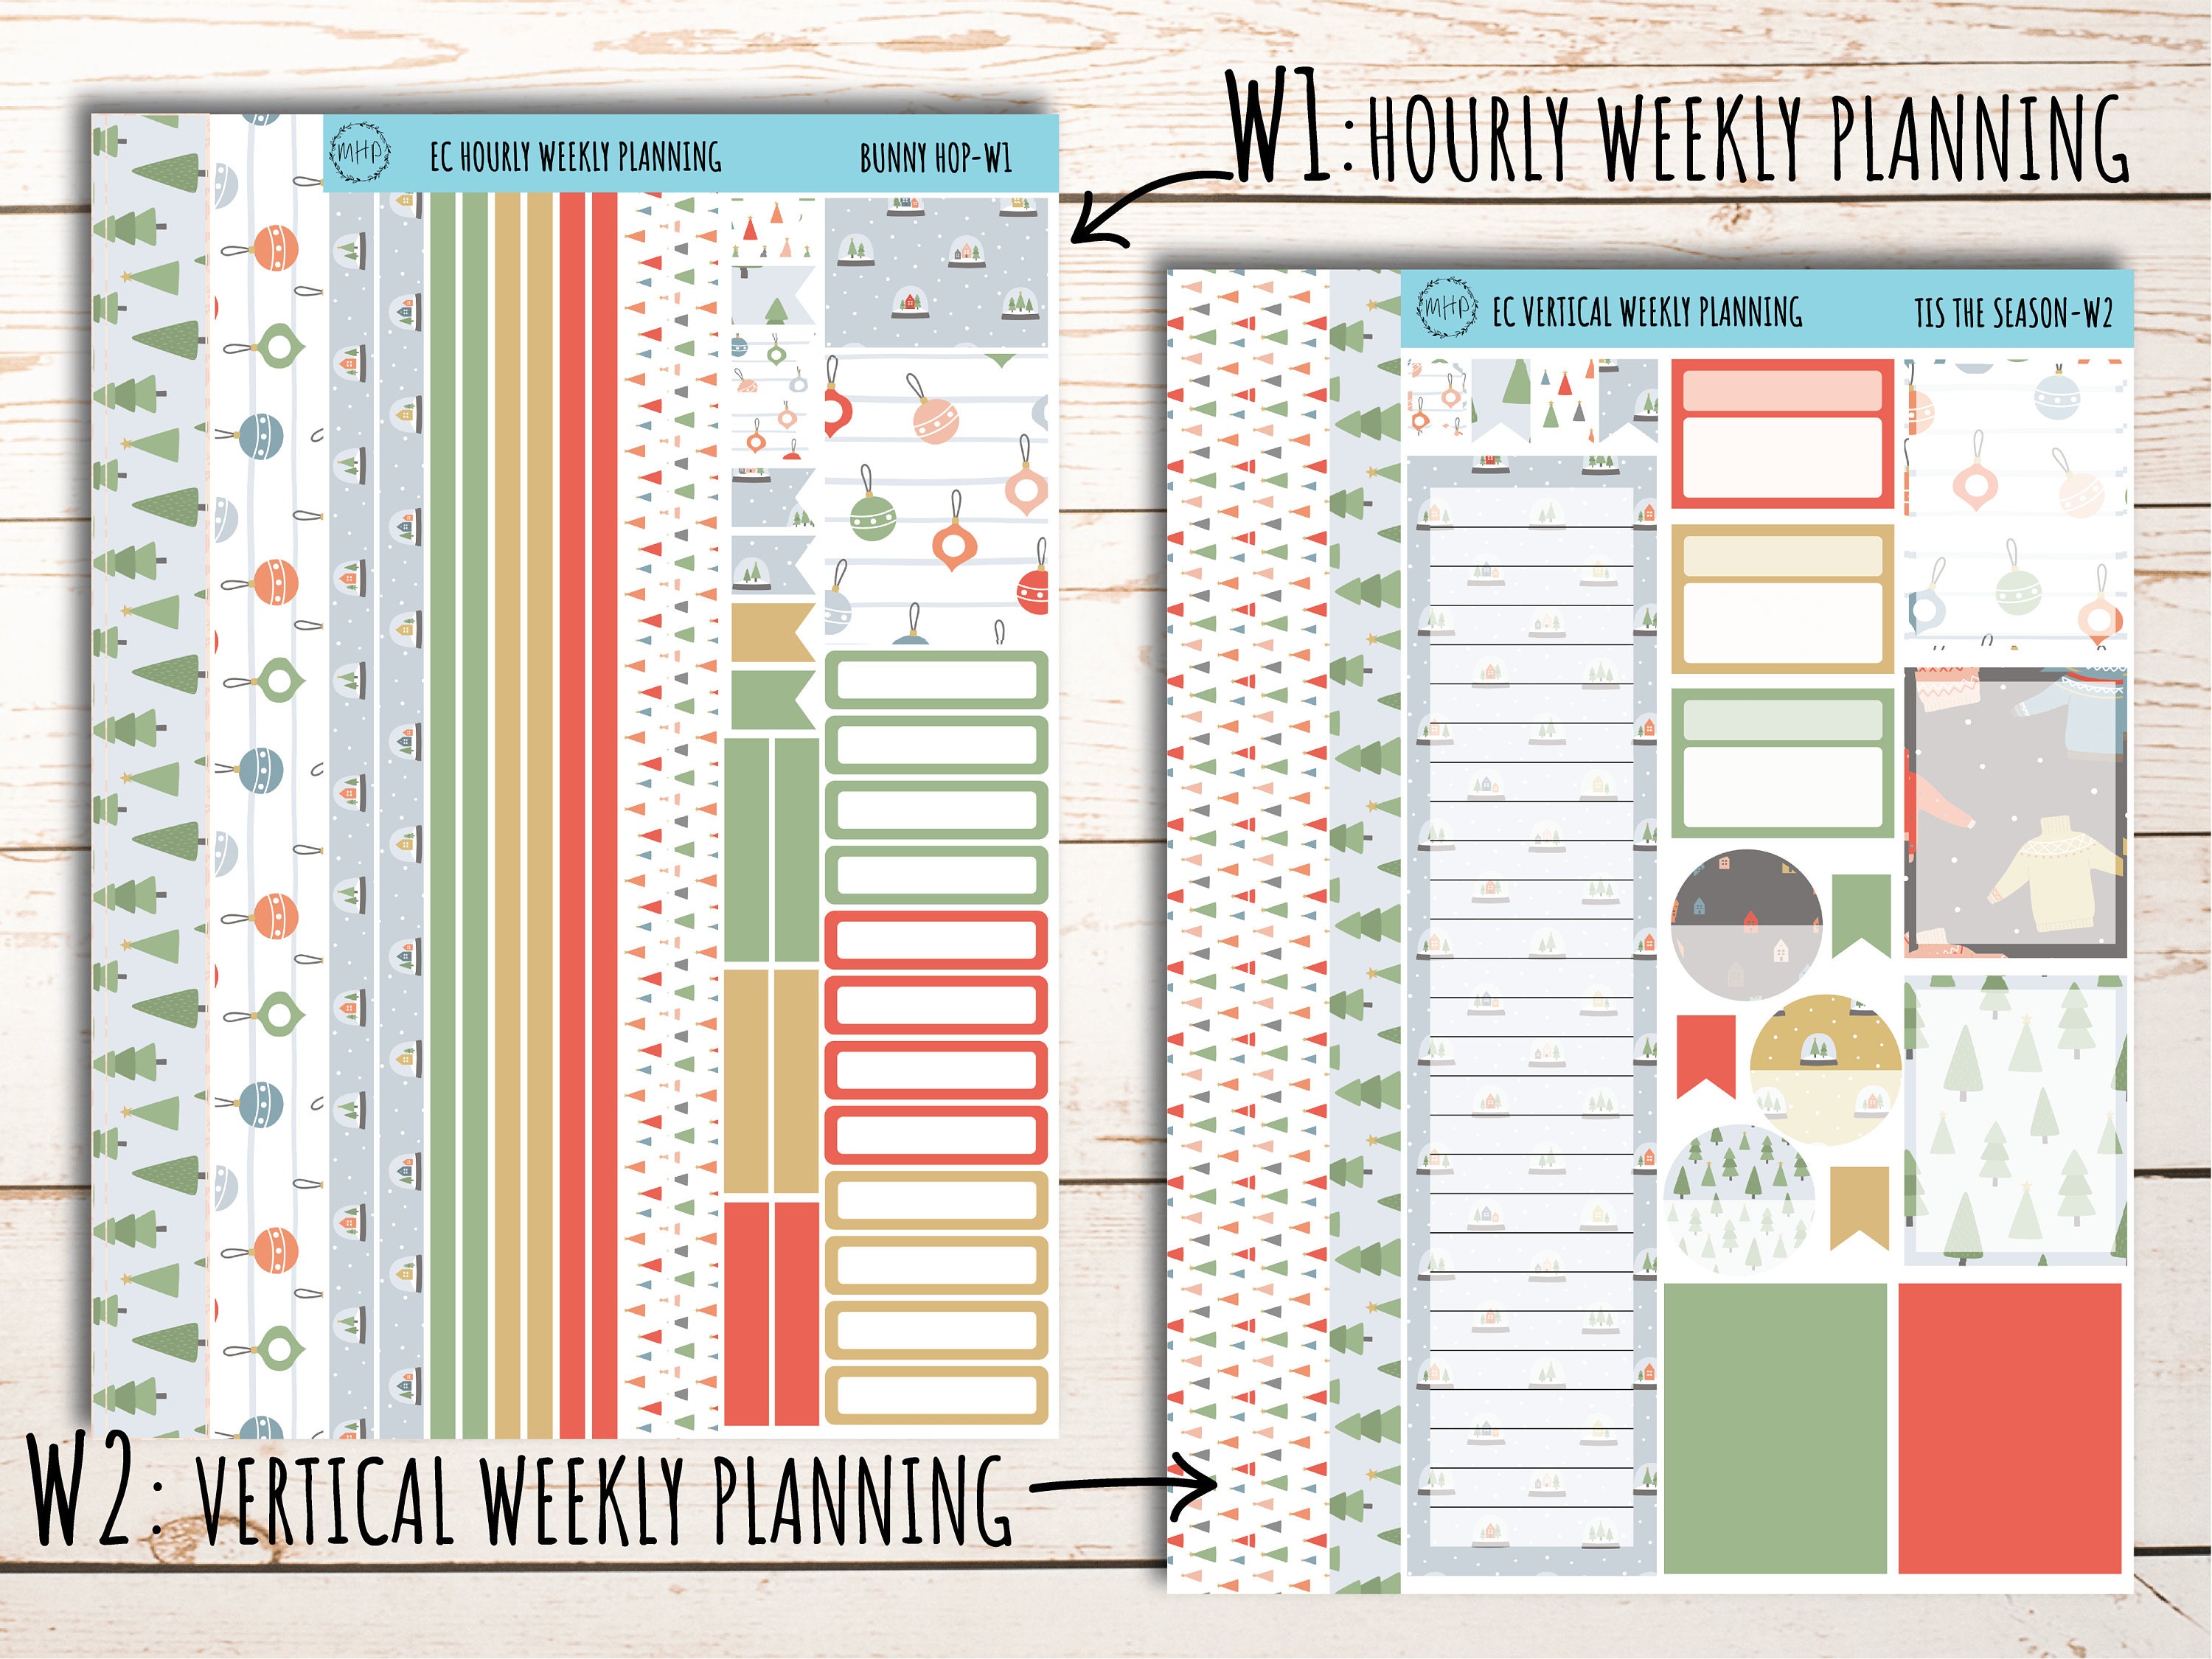 Erin Condren 7x9 Weekly Planning Kit. Planner Stickers JANUARY Snow Day  || SD-W